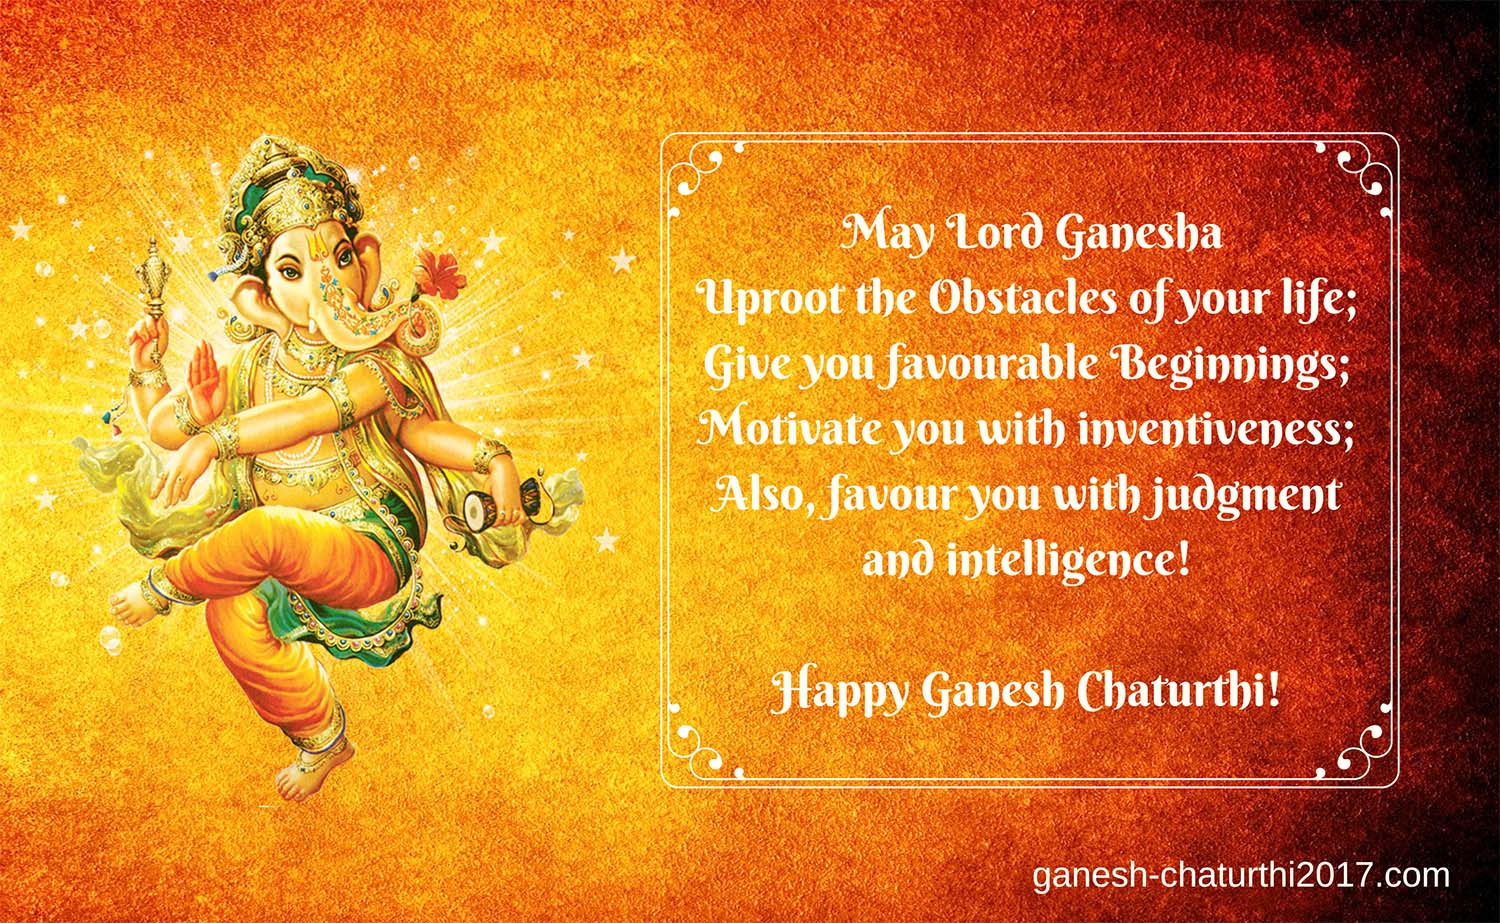 Ganesh Chaturthi Images with Message